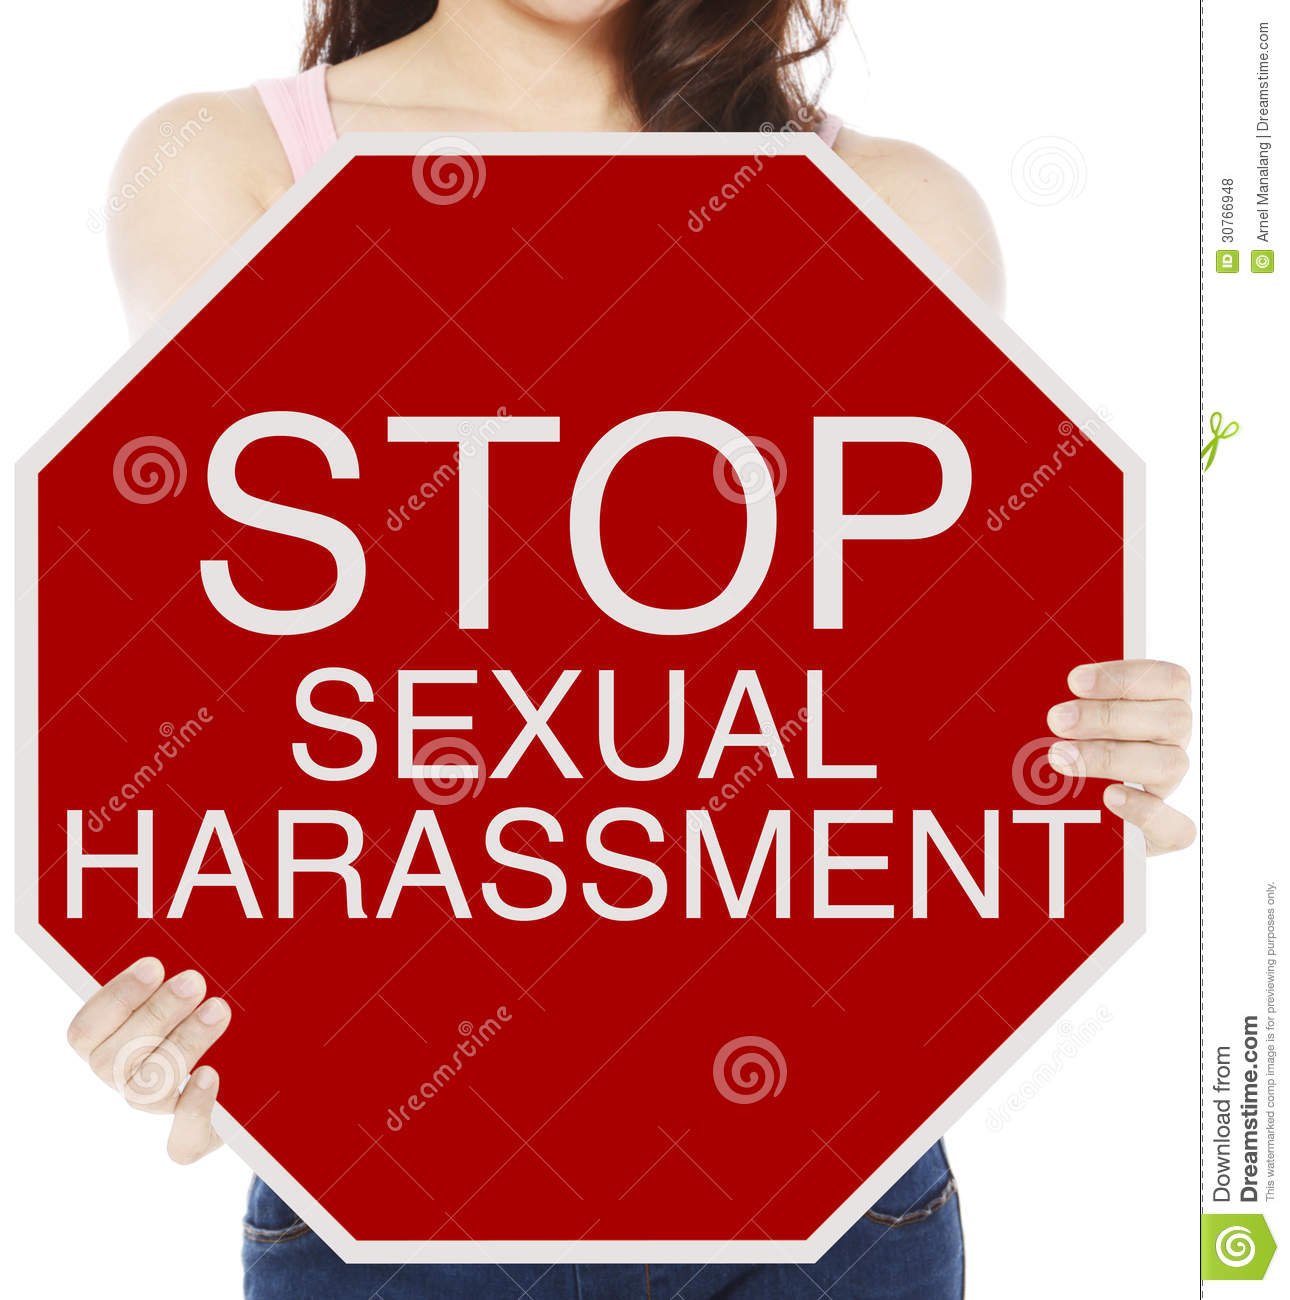 stop sexual harassment